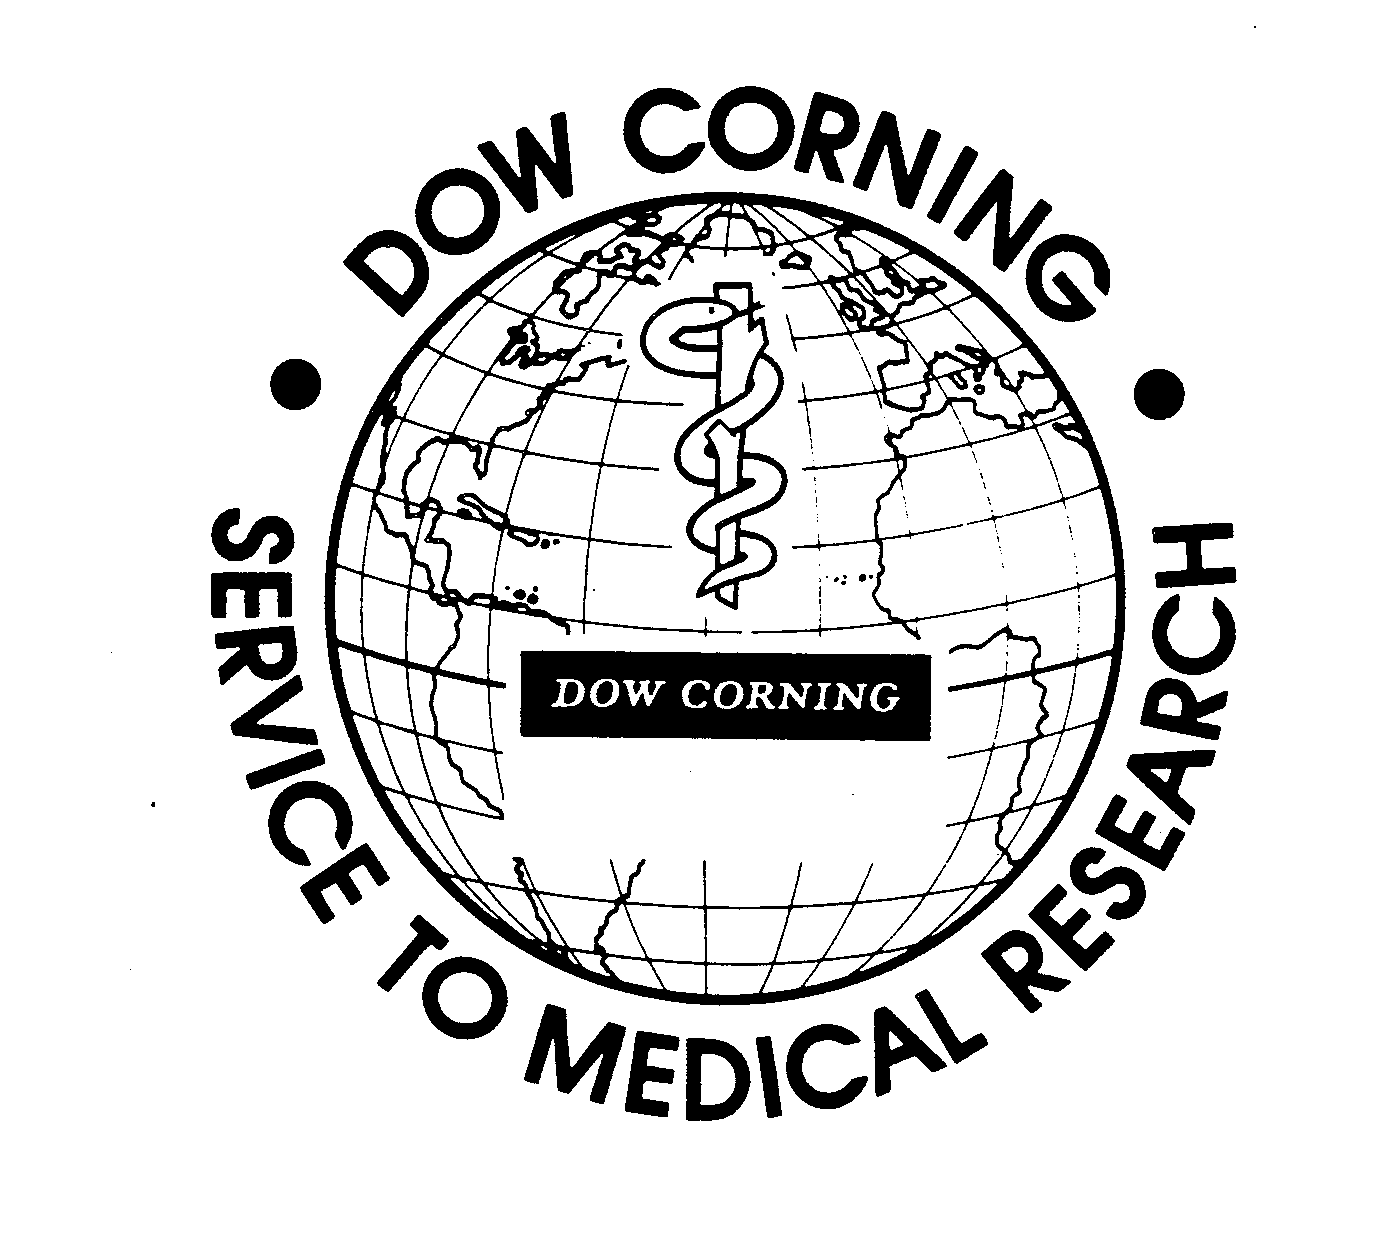  DOW CORNING DOW CORNING SERVICE TO MEDICAL RESEARCH